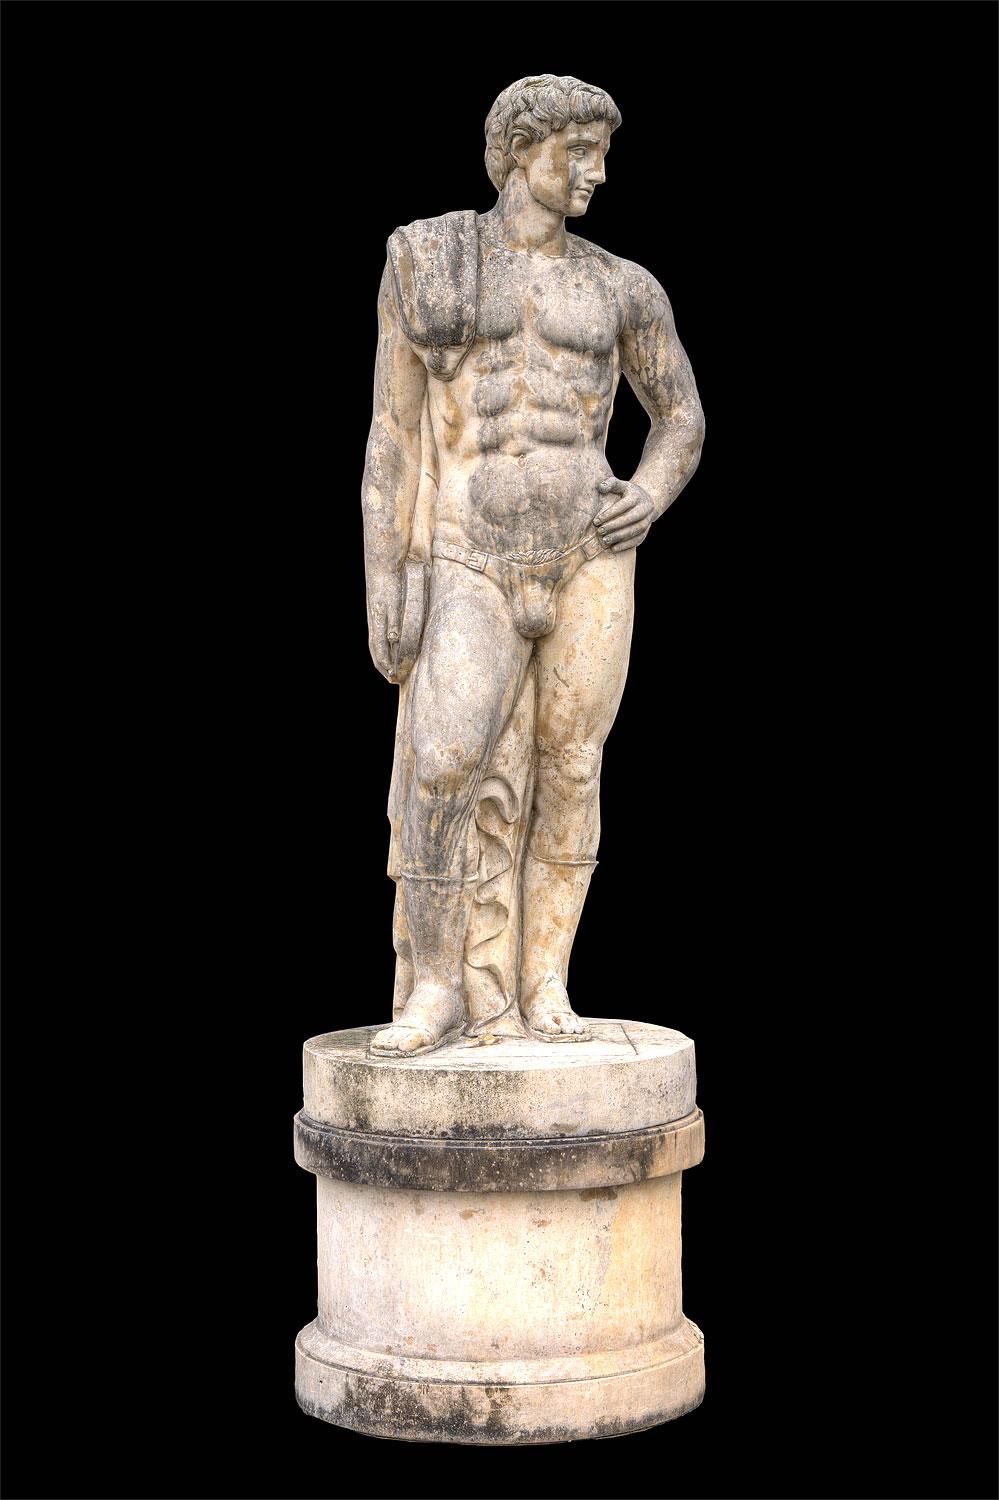  Monumental Italian Rationalist Marble Sculptures of Hercules and Discobolo For Sale 6